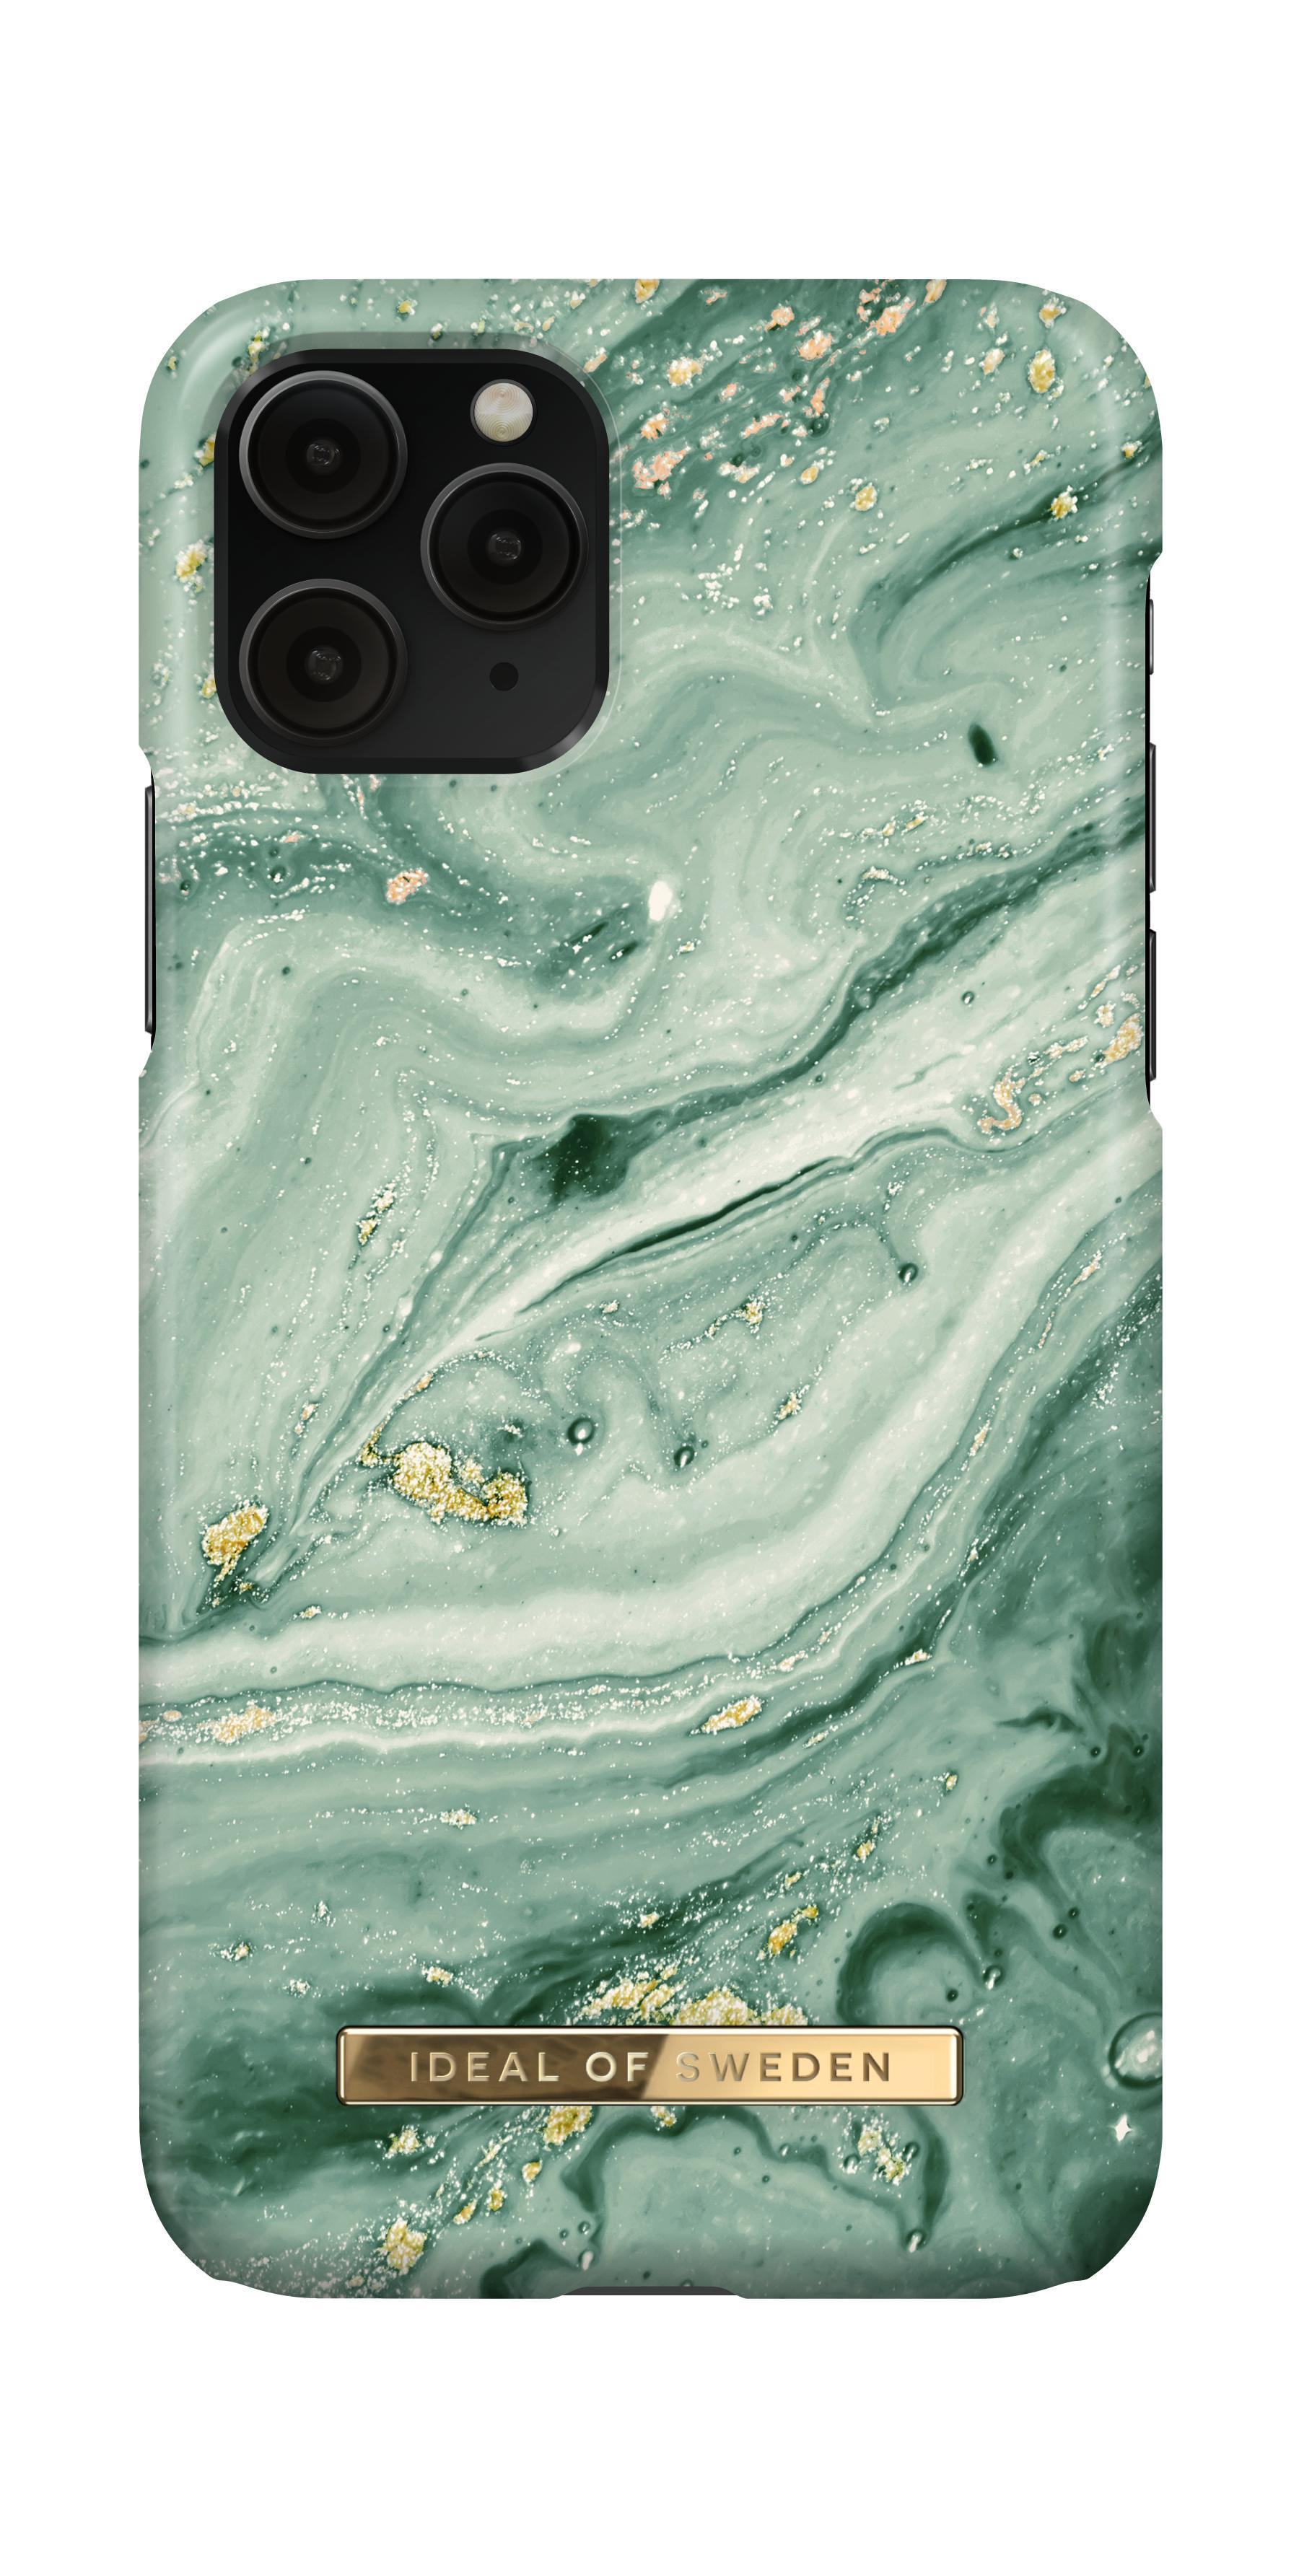 IDEAL OF SWEDEN iPhone Fashion, Pro, iPhone X, XS, Apple, Backcover, iPhone 11 Green